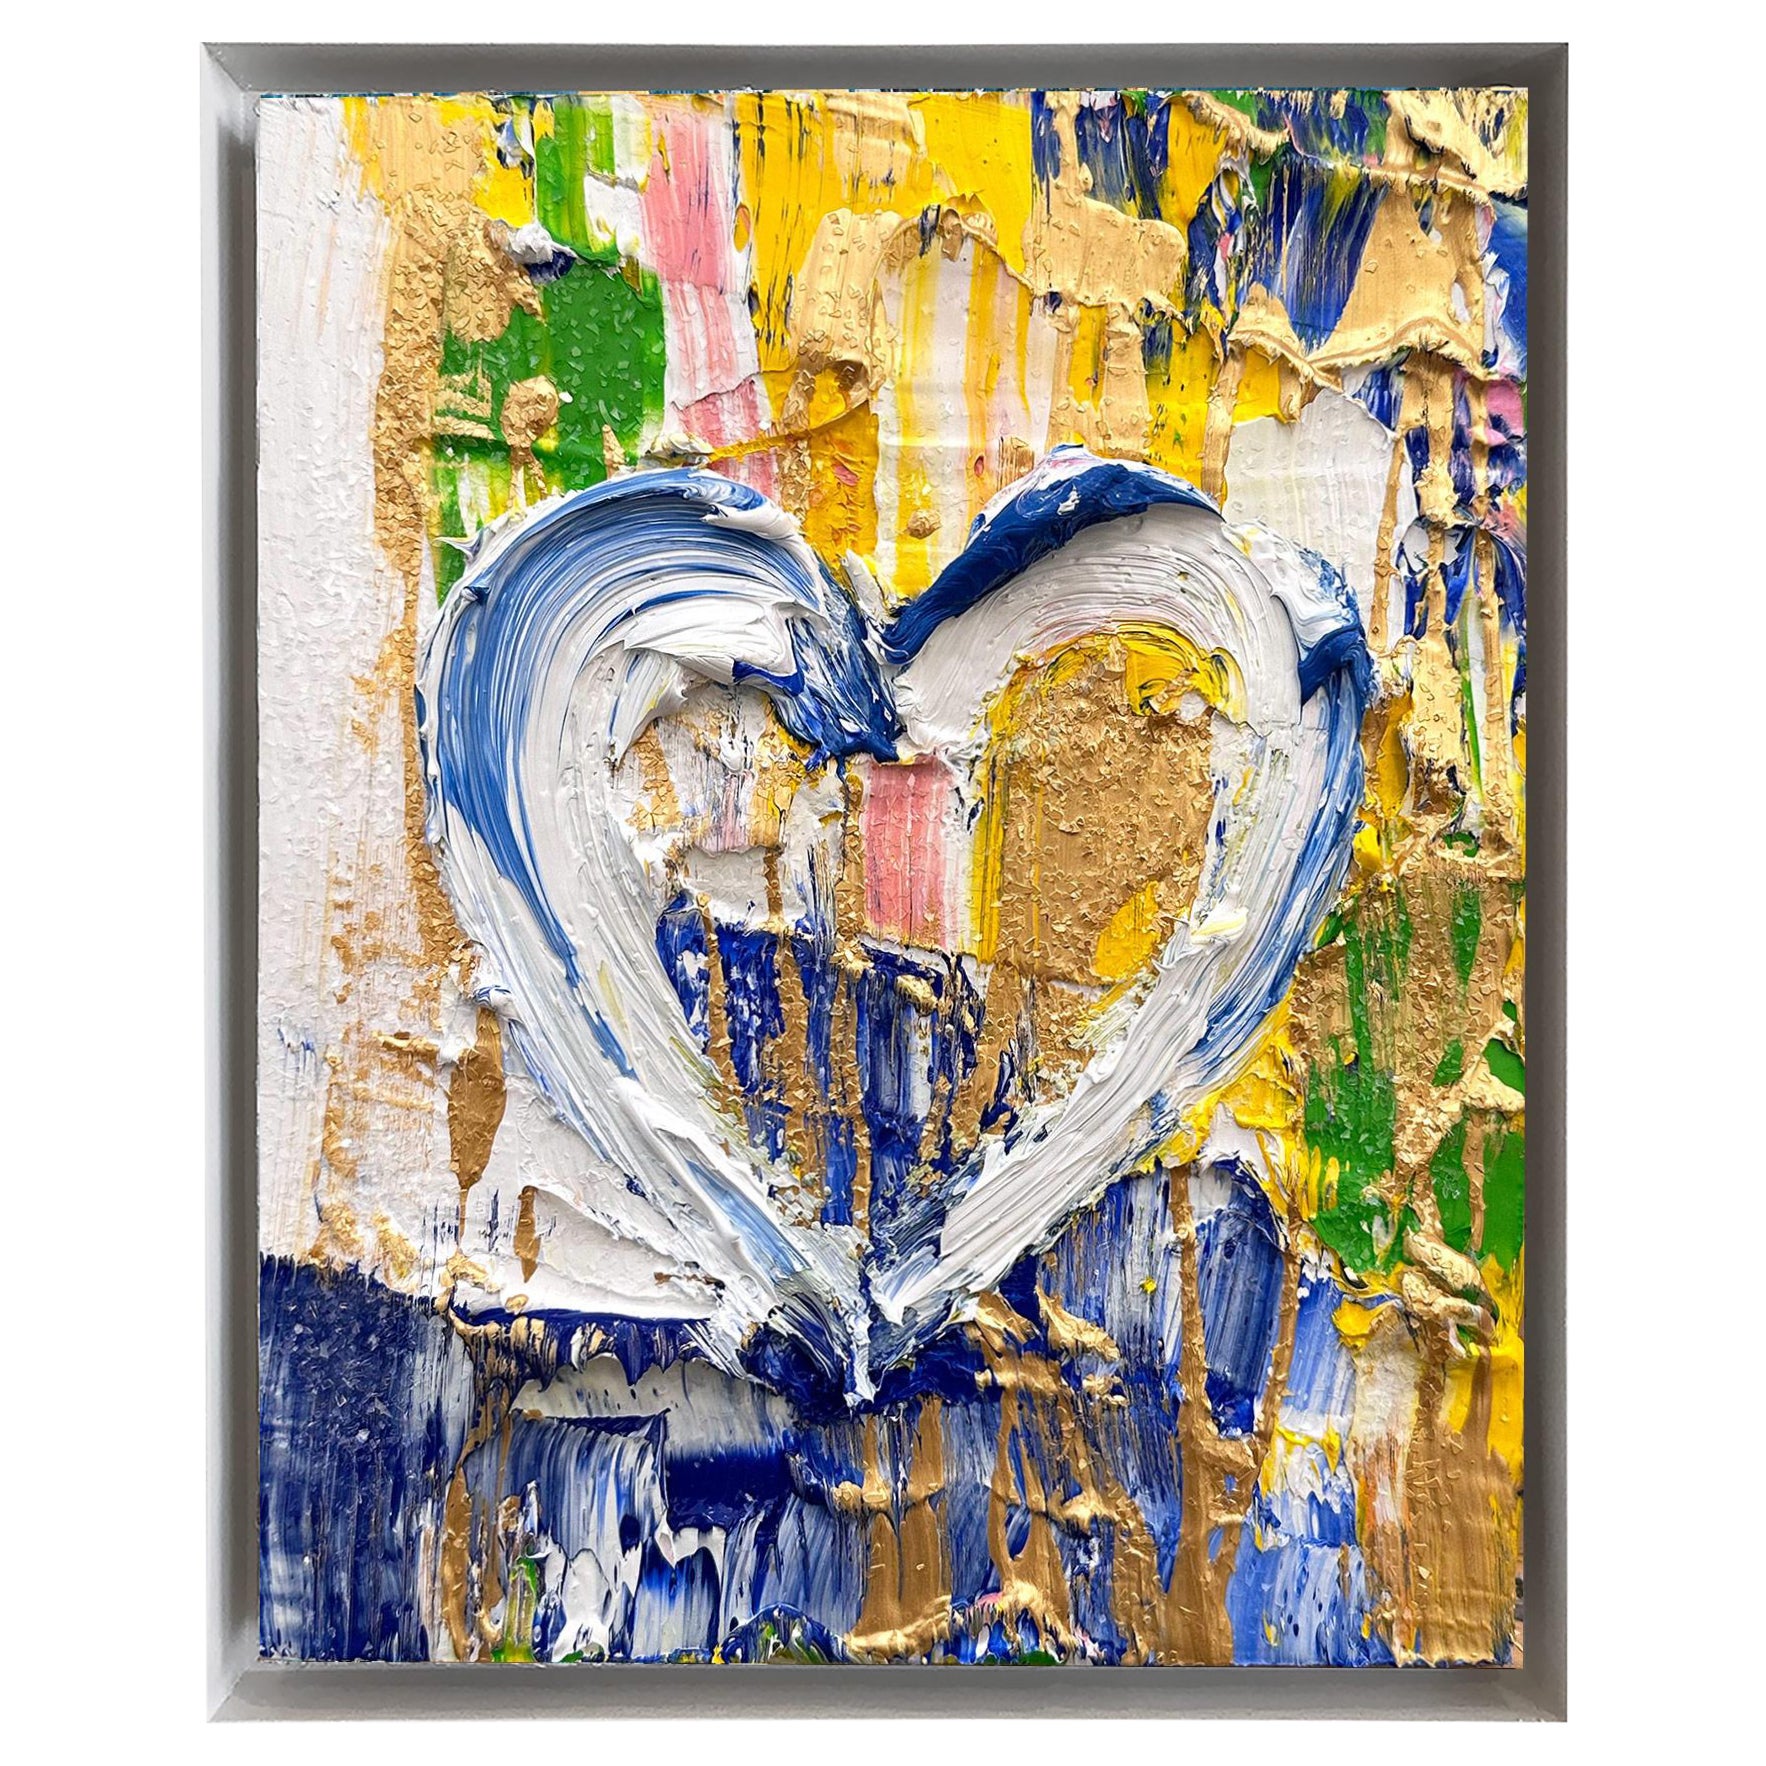 Cindy Shaoul Abstract Painting - "My Louboutin Heart" Contemporary Oil Painting on Wood White Floater Frame